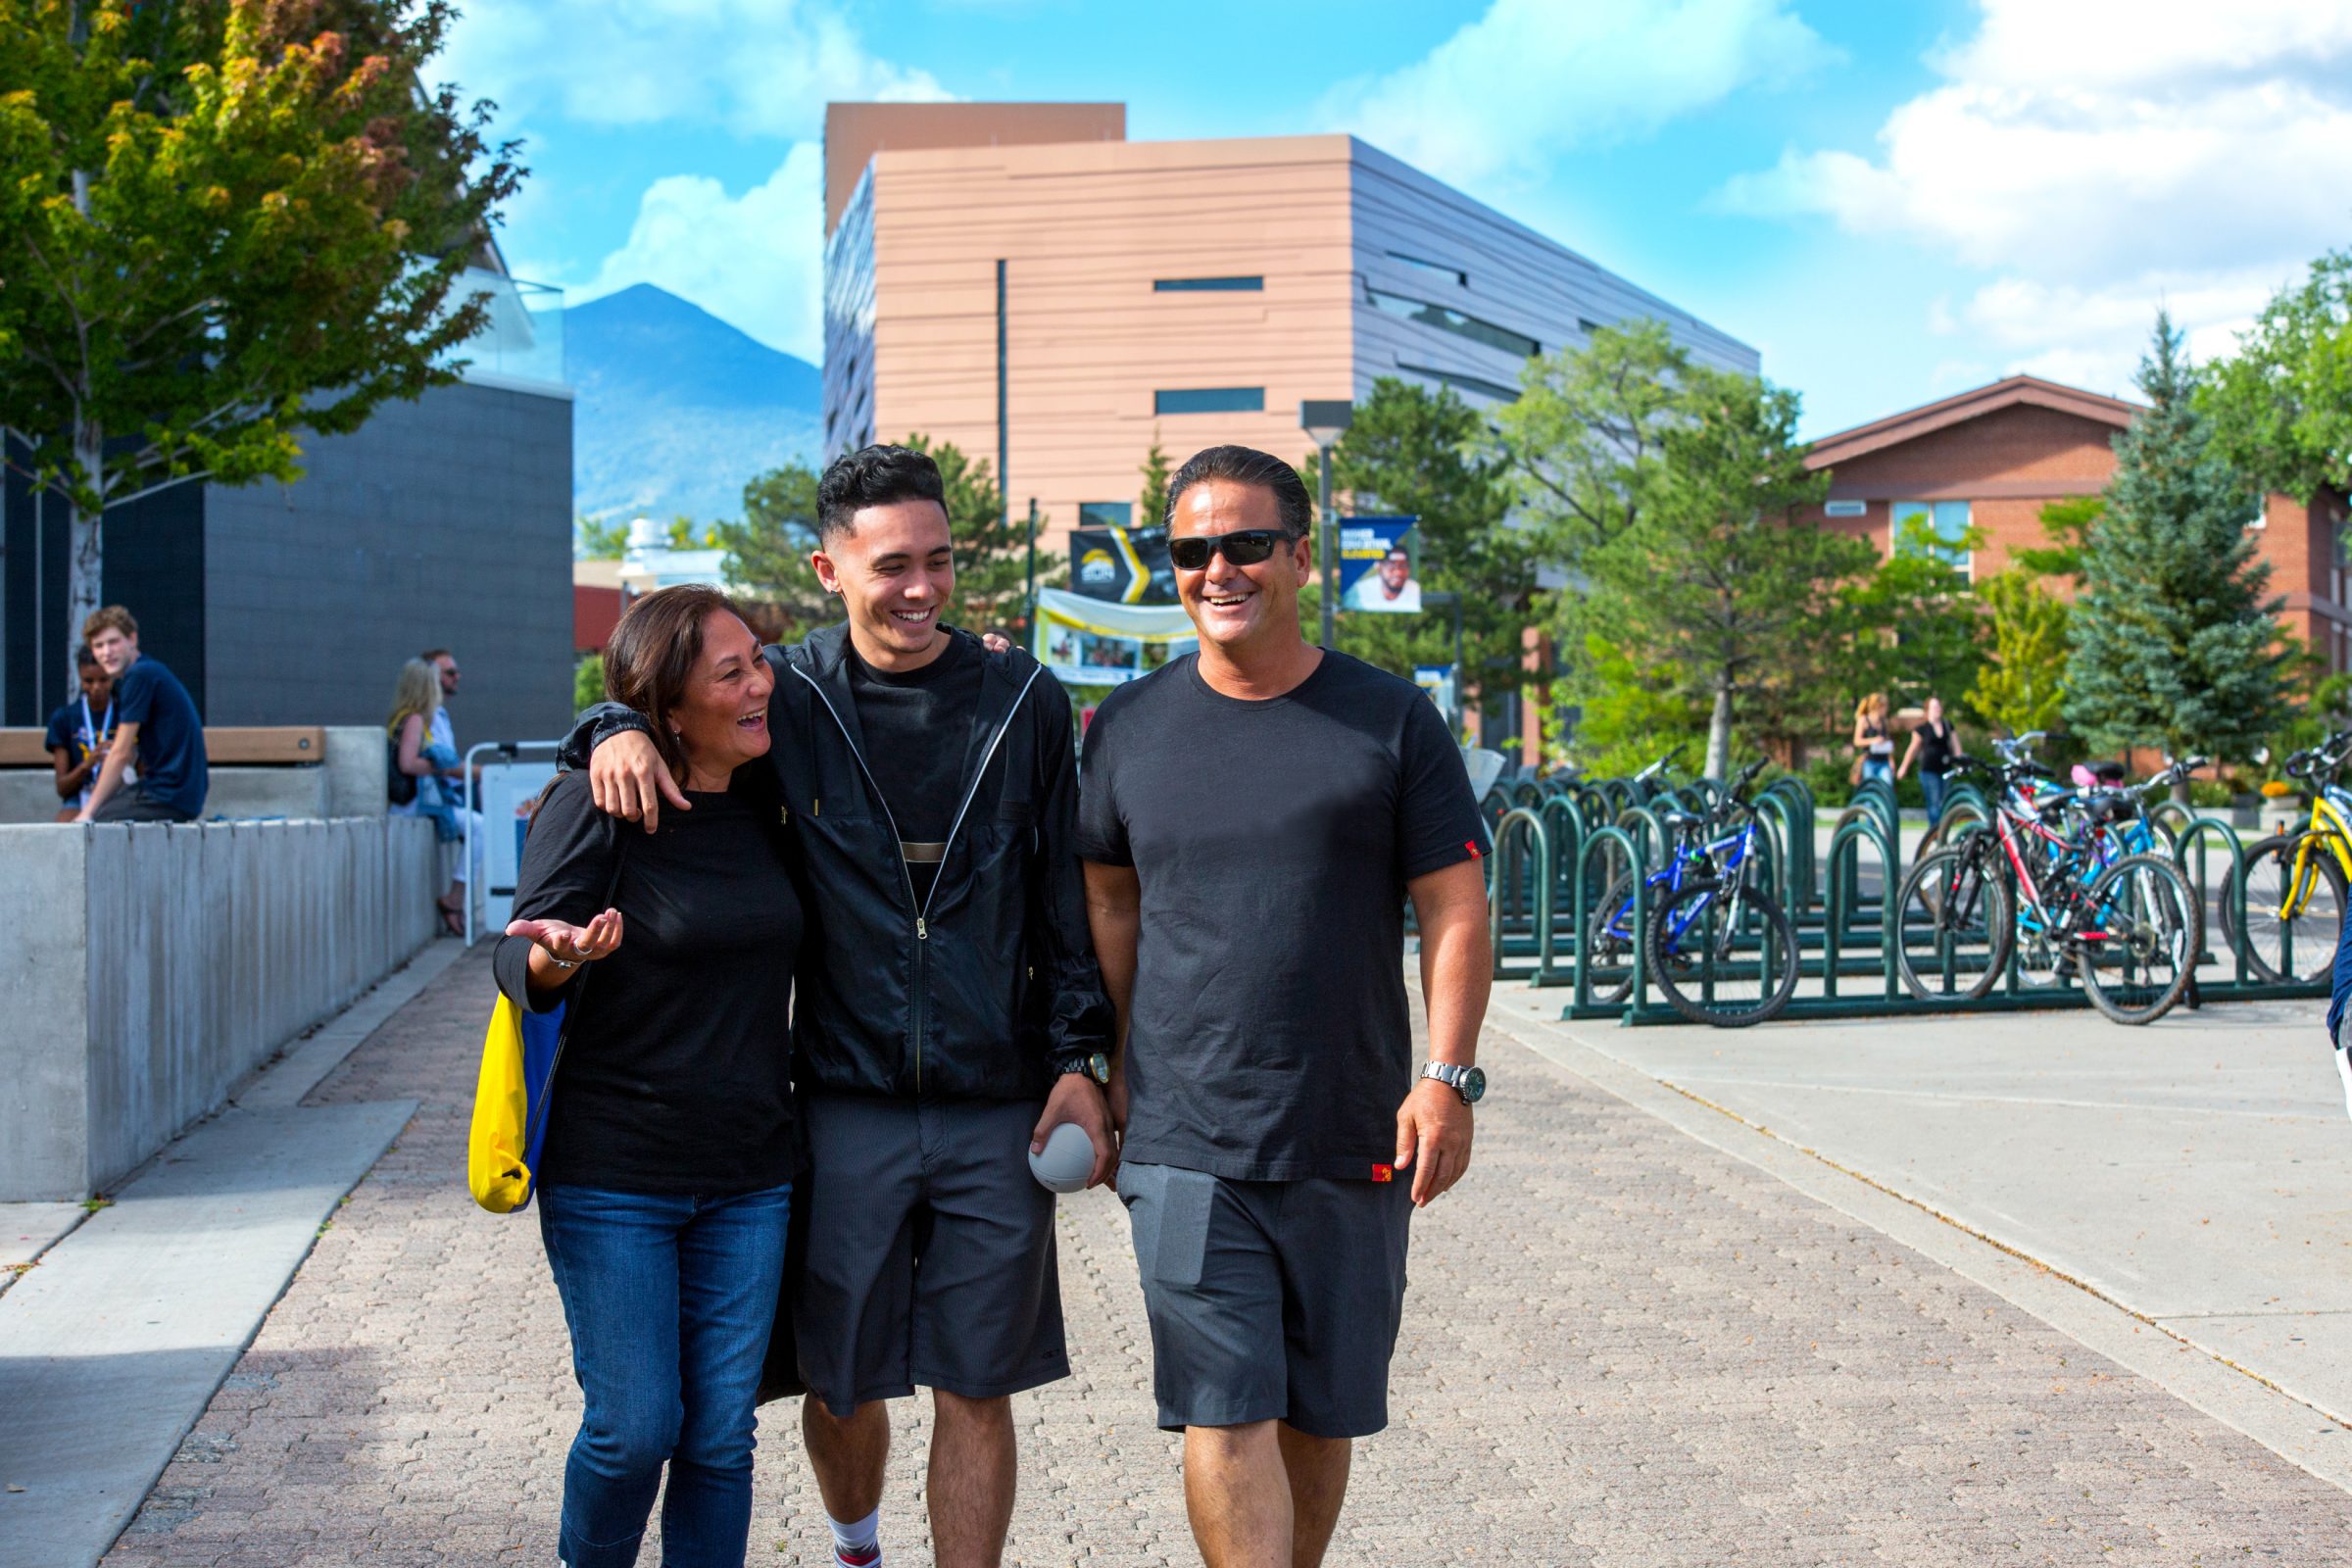 A new student with his parents on Flagstaff campus.